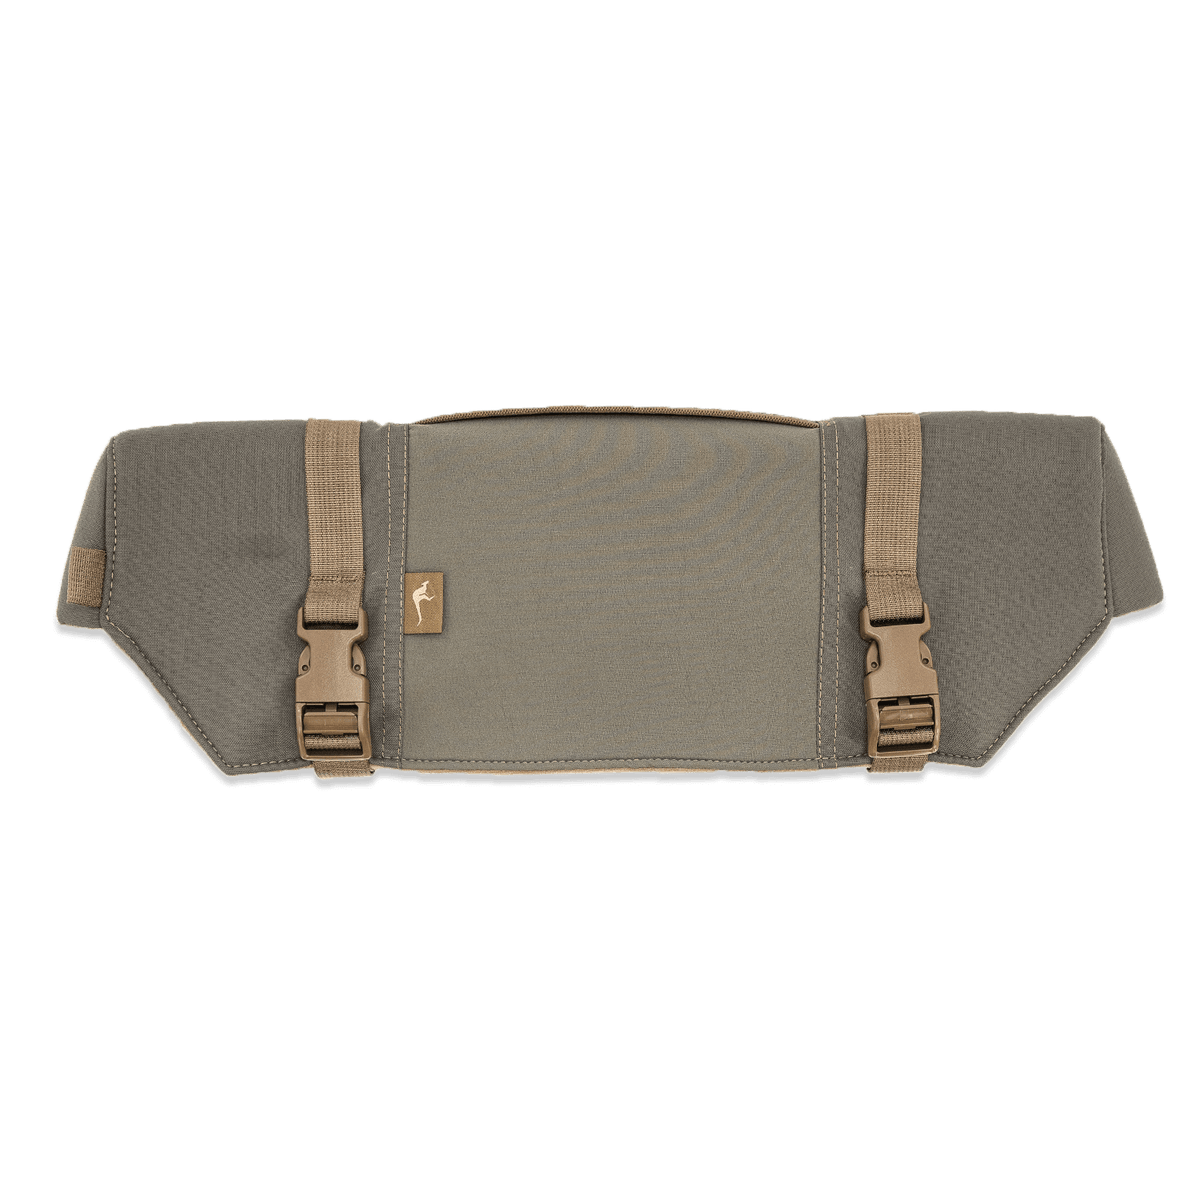 padded scope cover